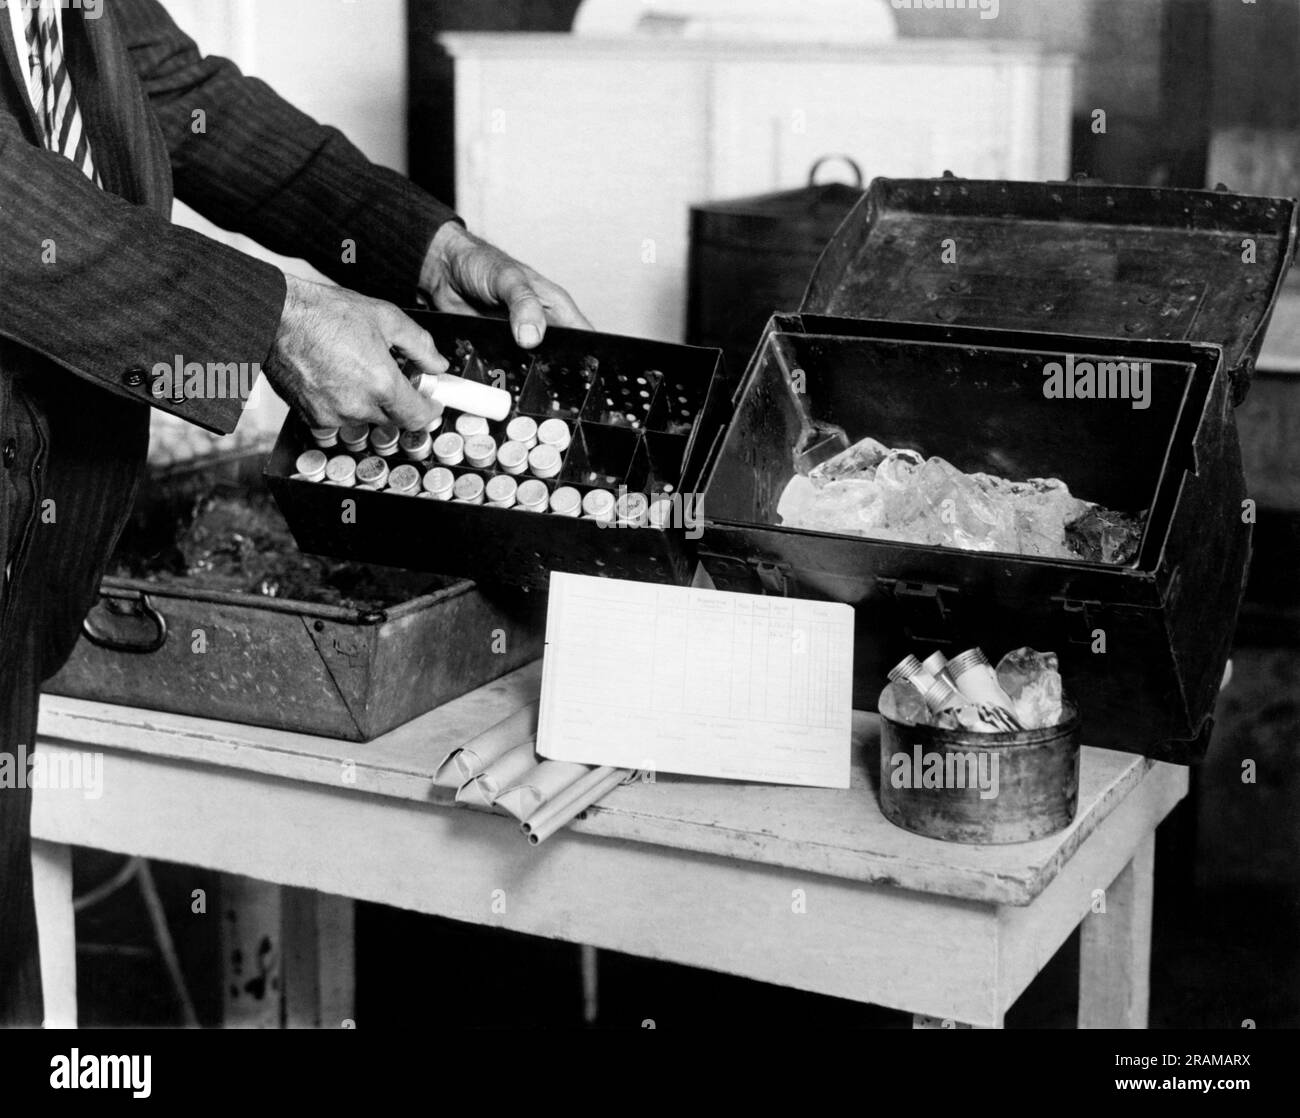 New York, New York:  c. 1926 A New York City Health Department Inspector's milk sample outfit. The milk samples at the left are constantly kept on ice so that accurate tests may be made of them in the laboratory. Stock Photo